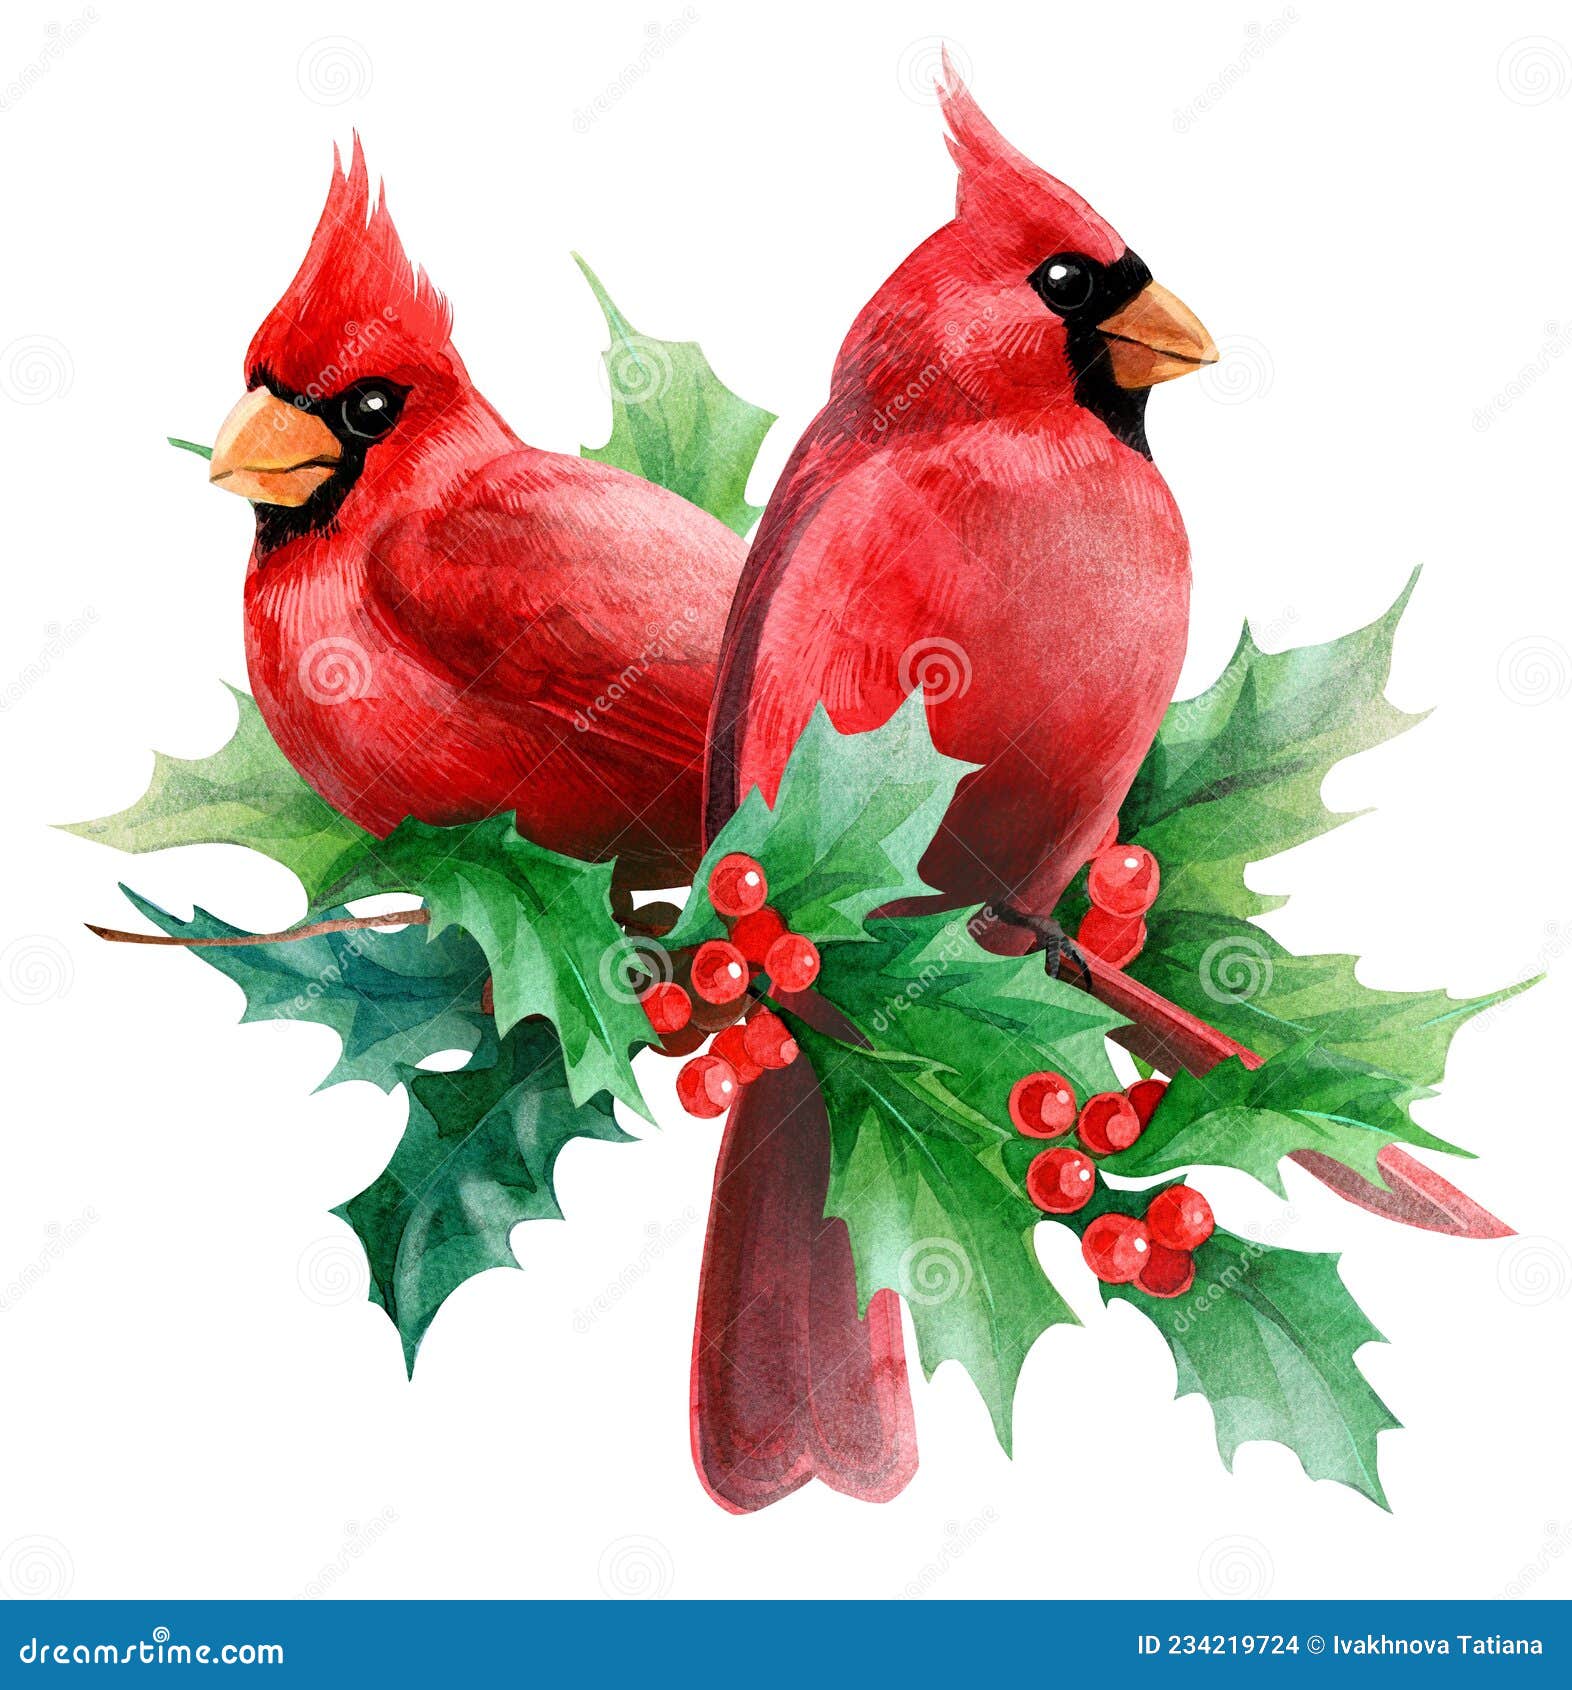 Watercolor Cliparts Christmas And Winter Red Bird Cardinals Stock